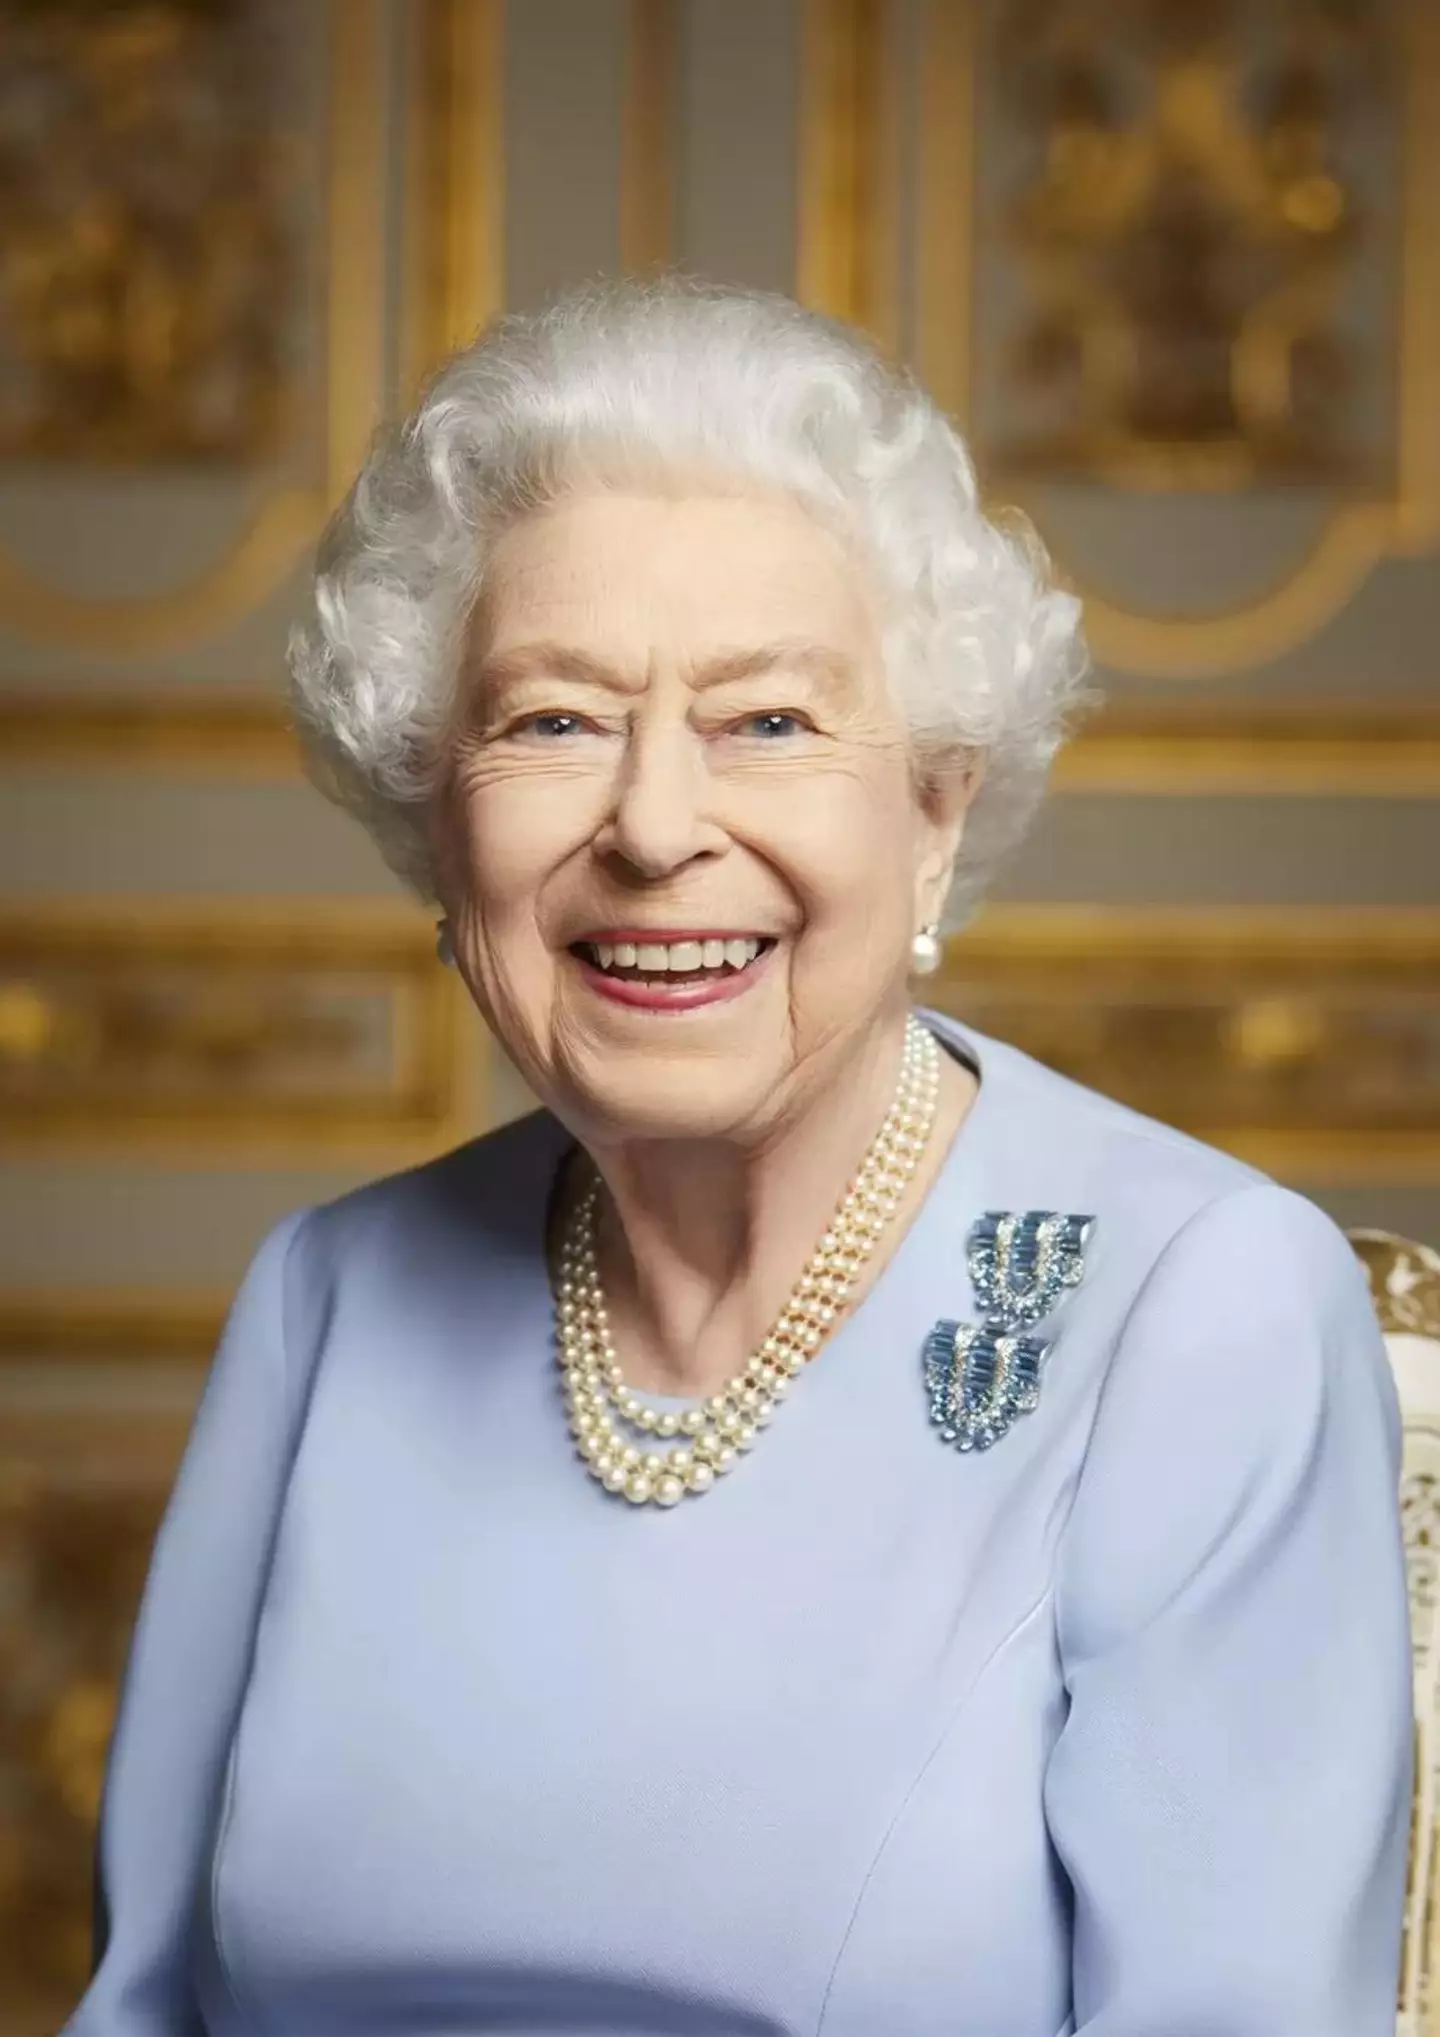 A new portrait of the Queen has been unveiled.